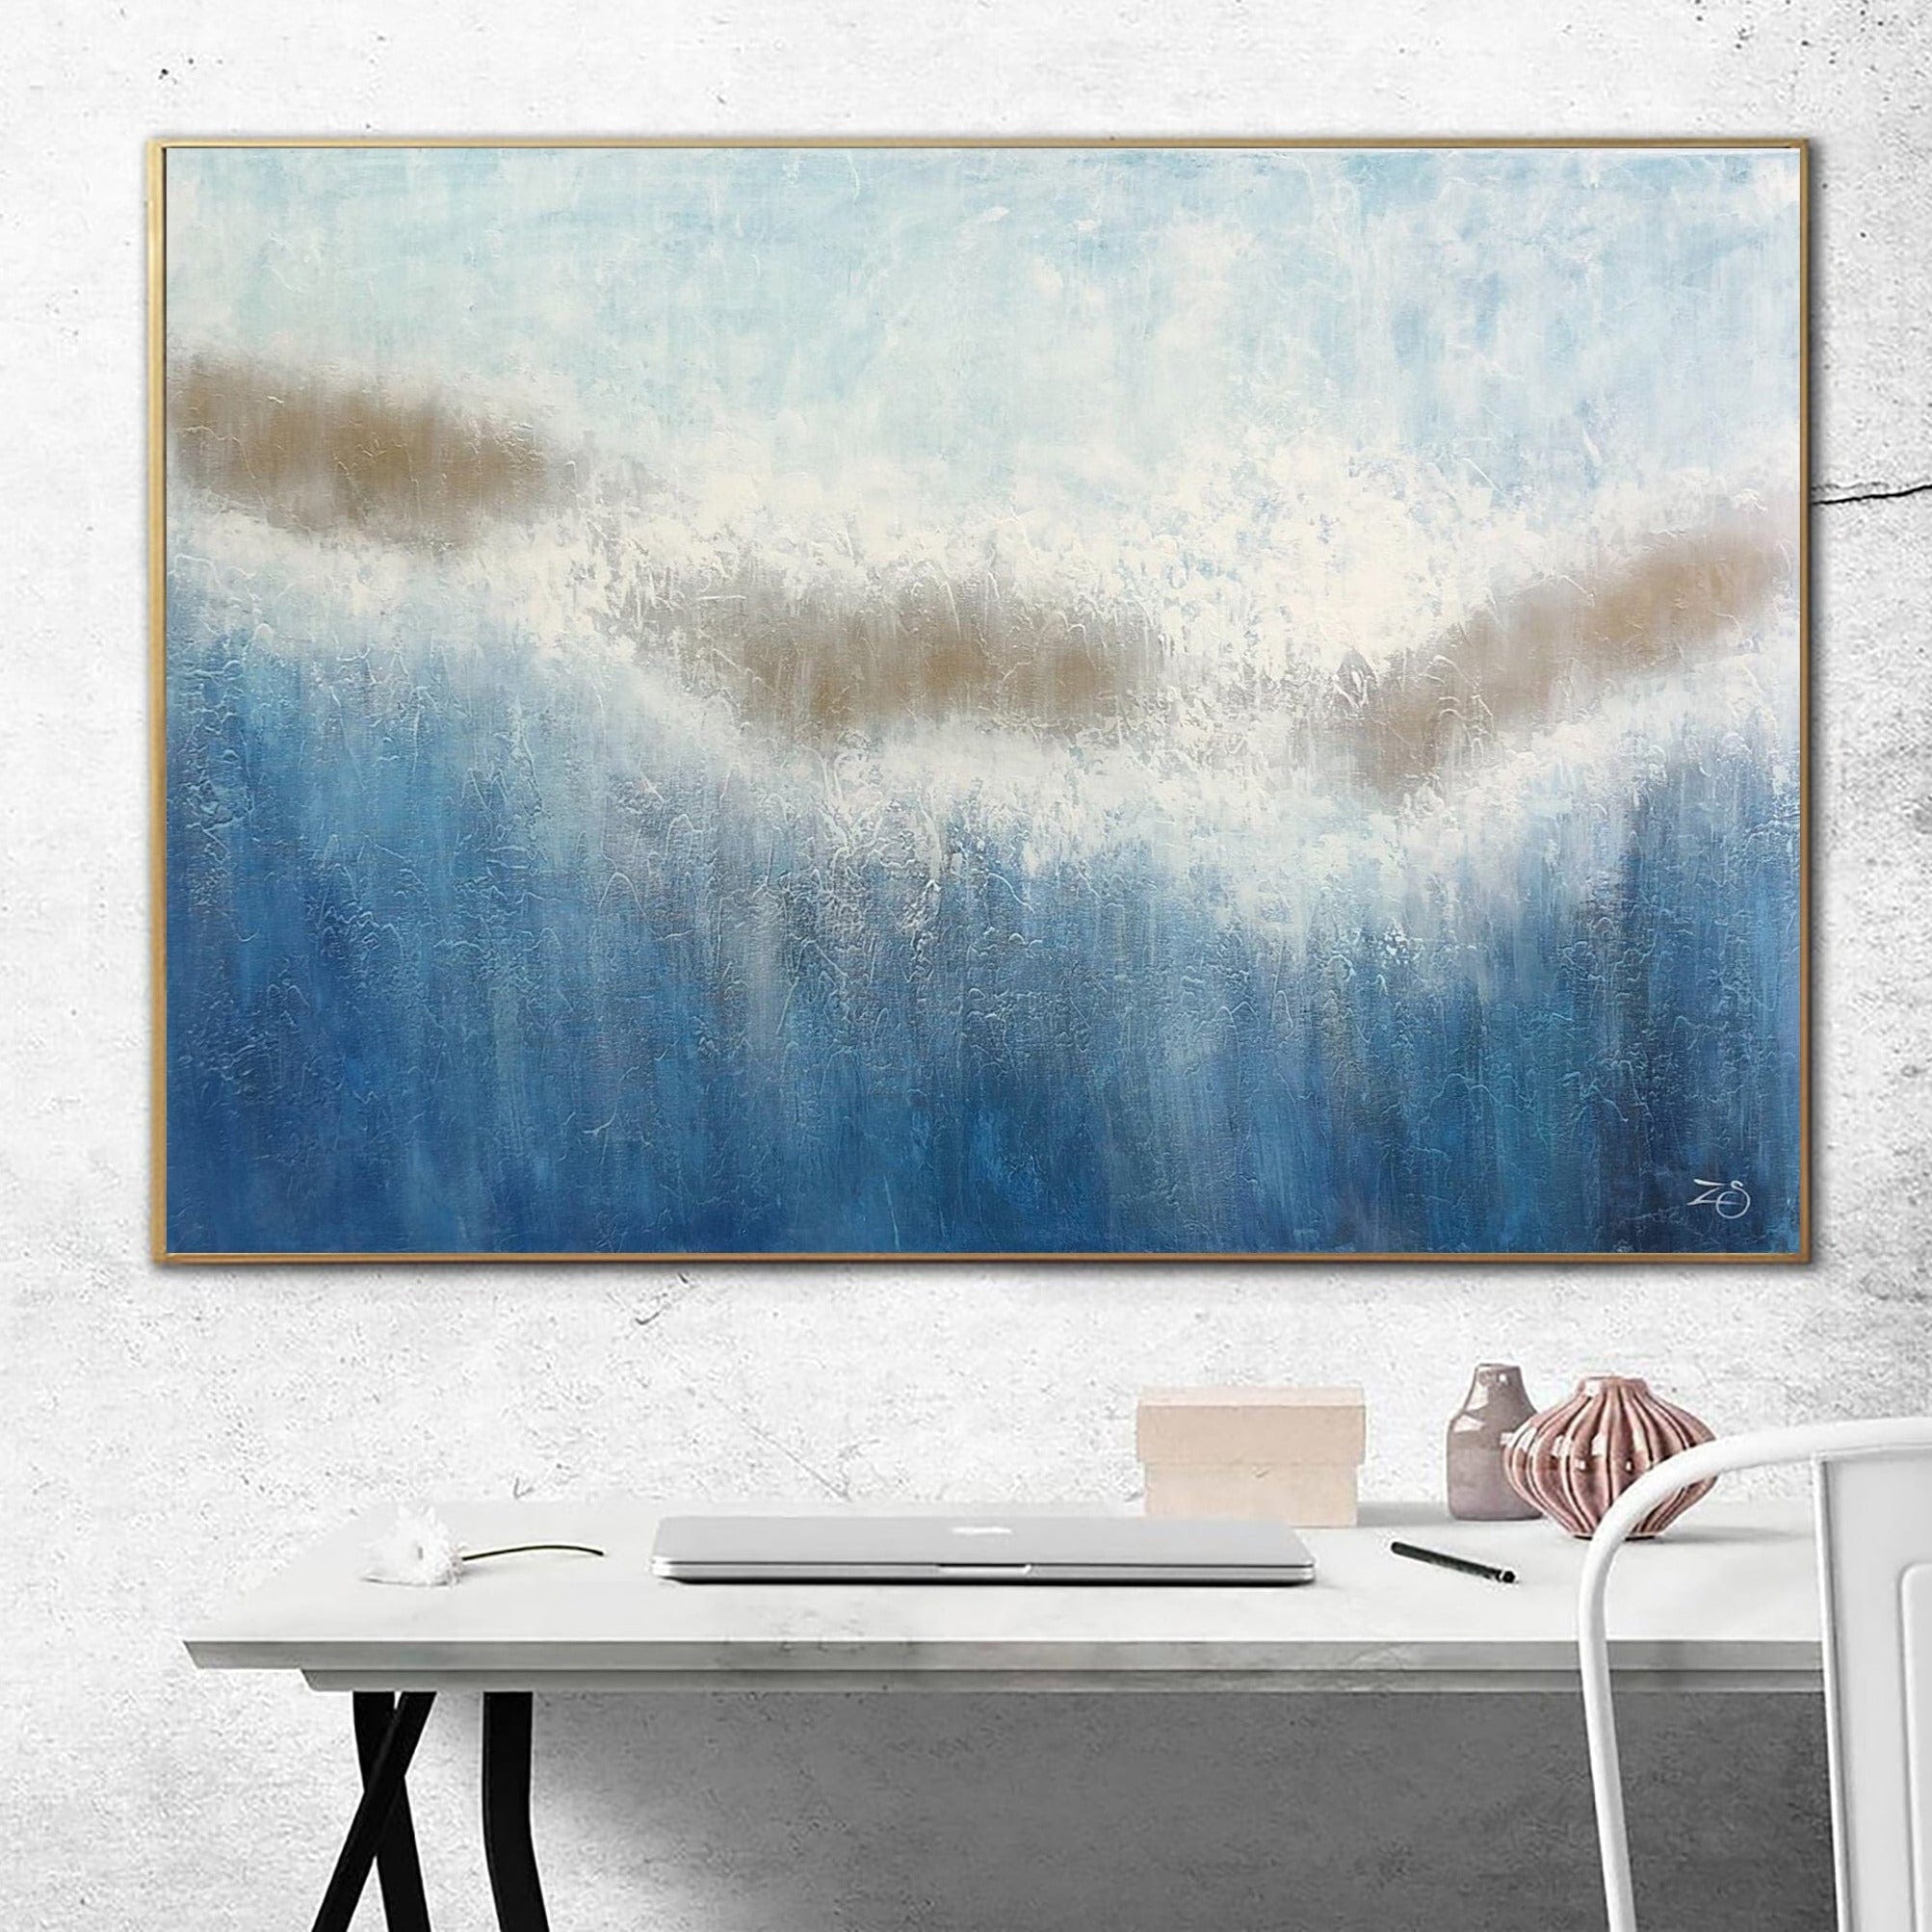 Large Painting on Canvas Original Wall Art White Painting Blue Painting  Contemporary Art Original Painting Canvas Abstract Room Decor 